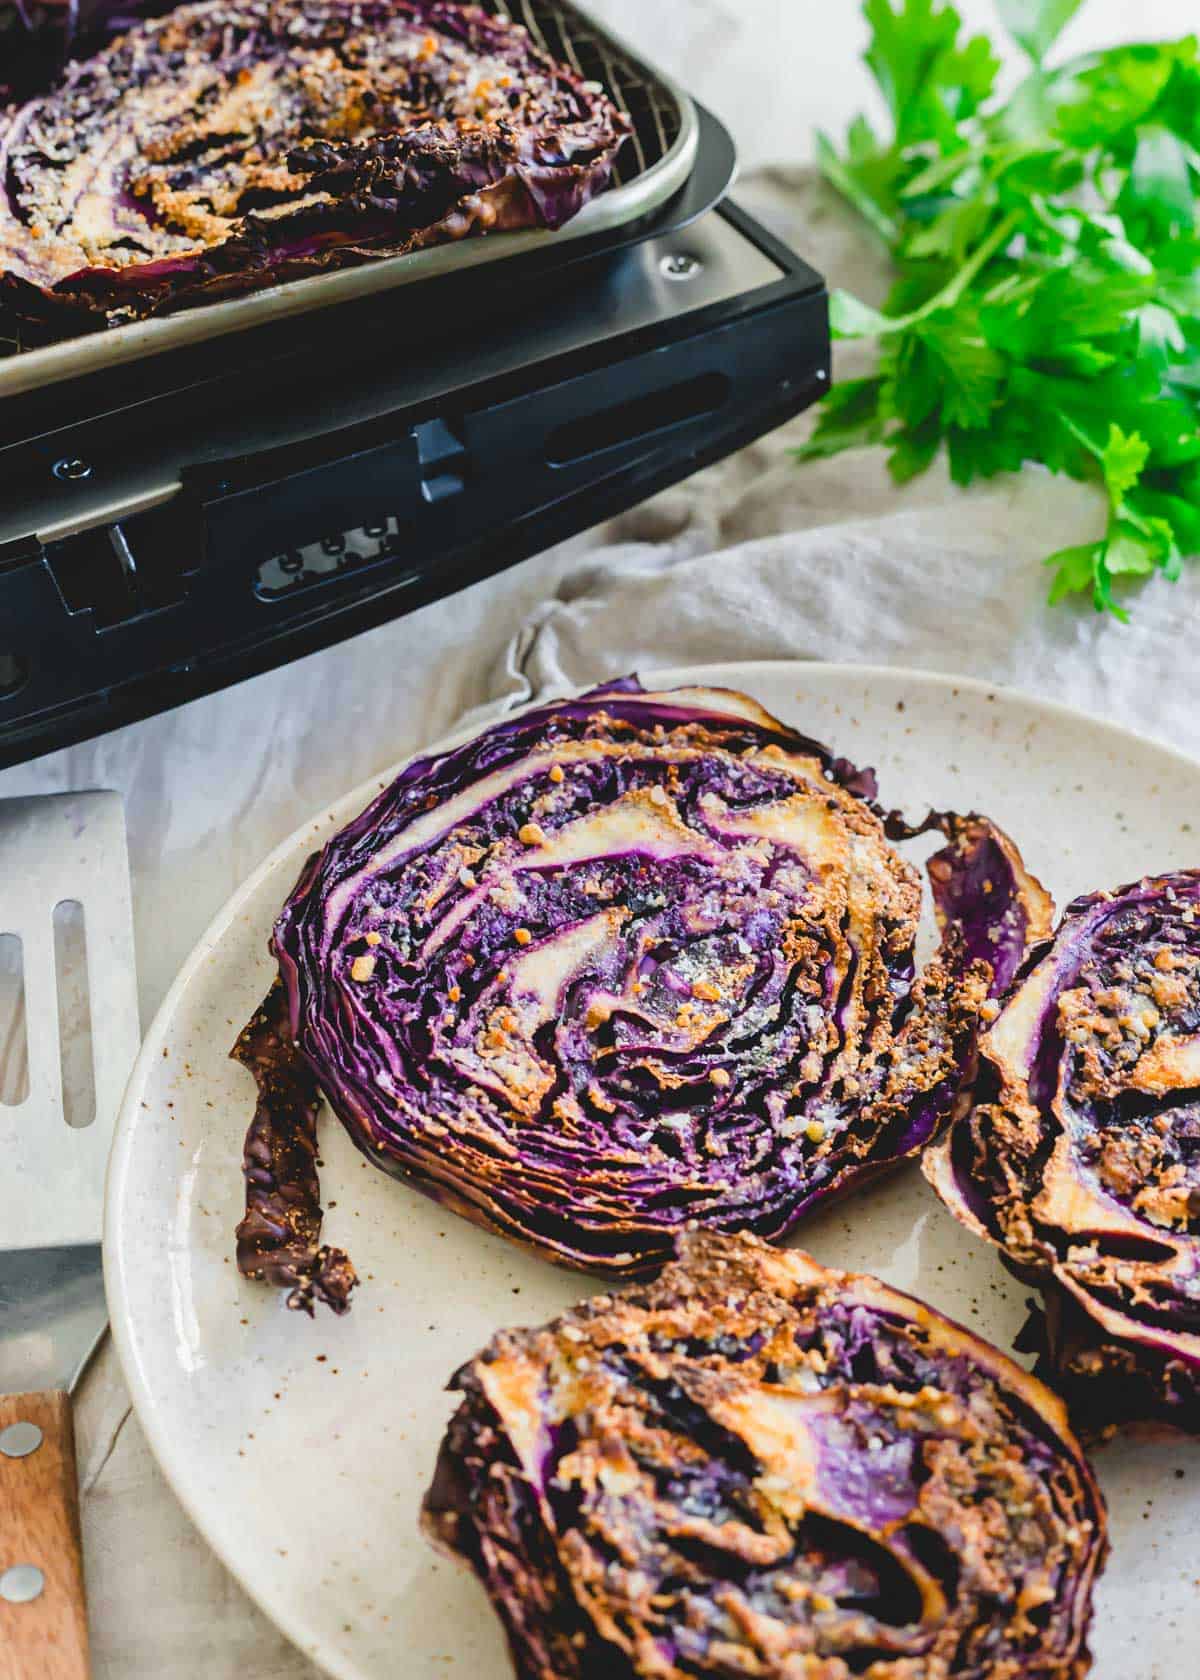 Red cabbage steaks cooked in the air fryer.